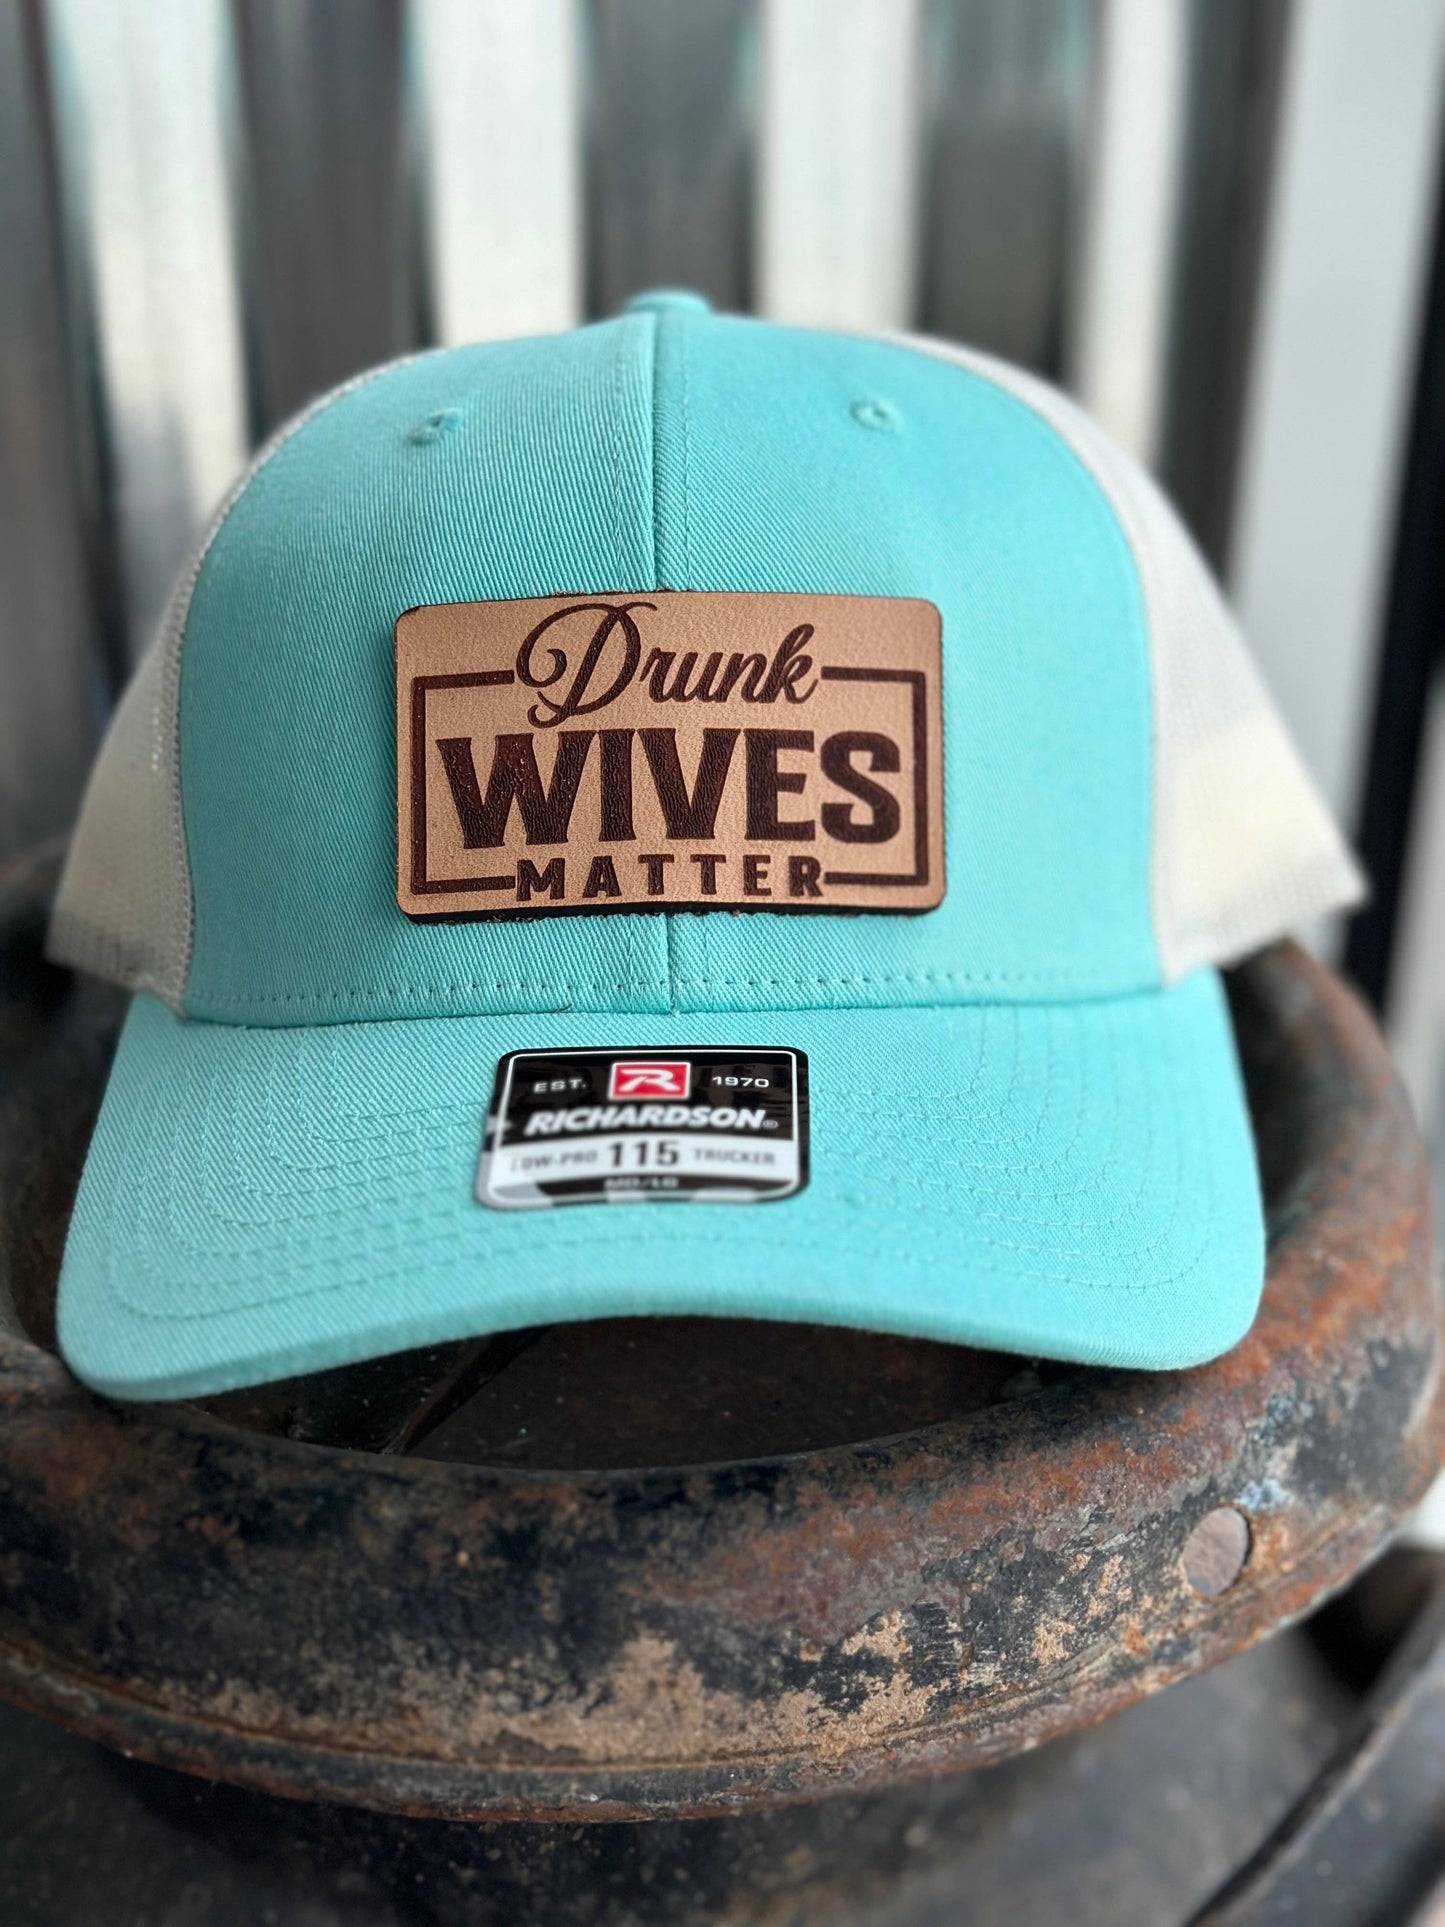 Drunk wives matter hat: Turquoise